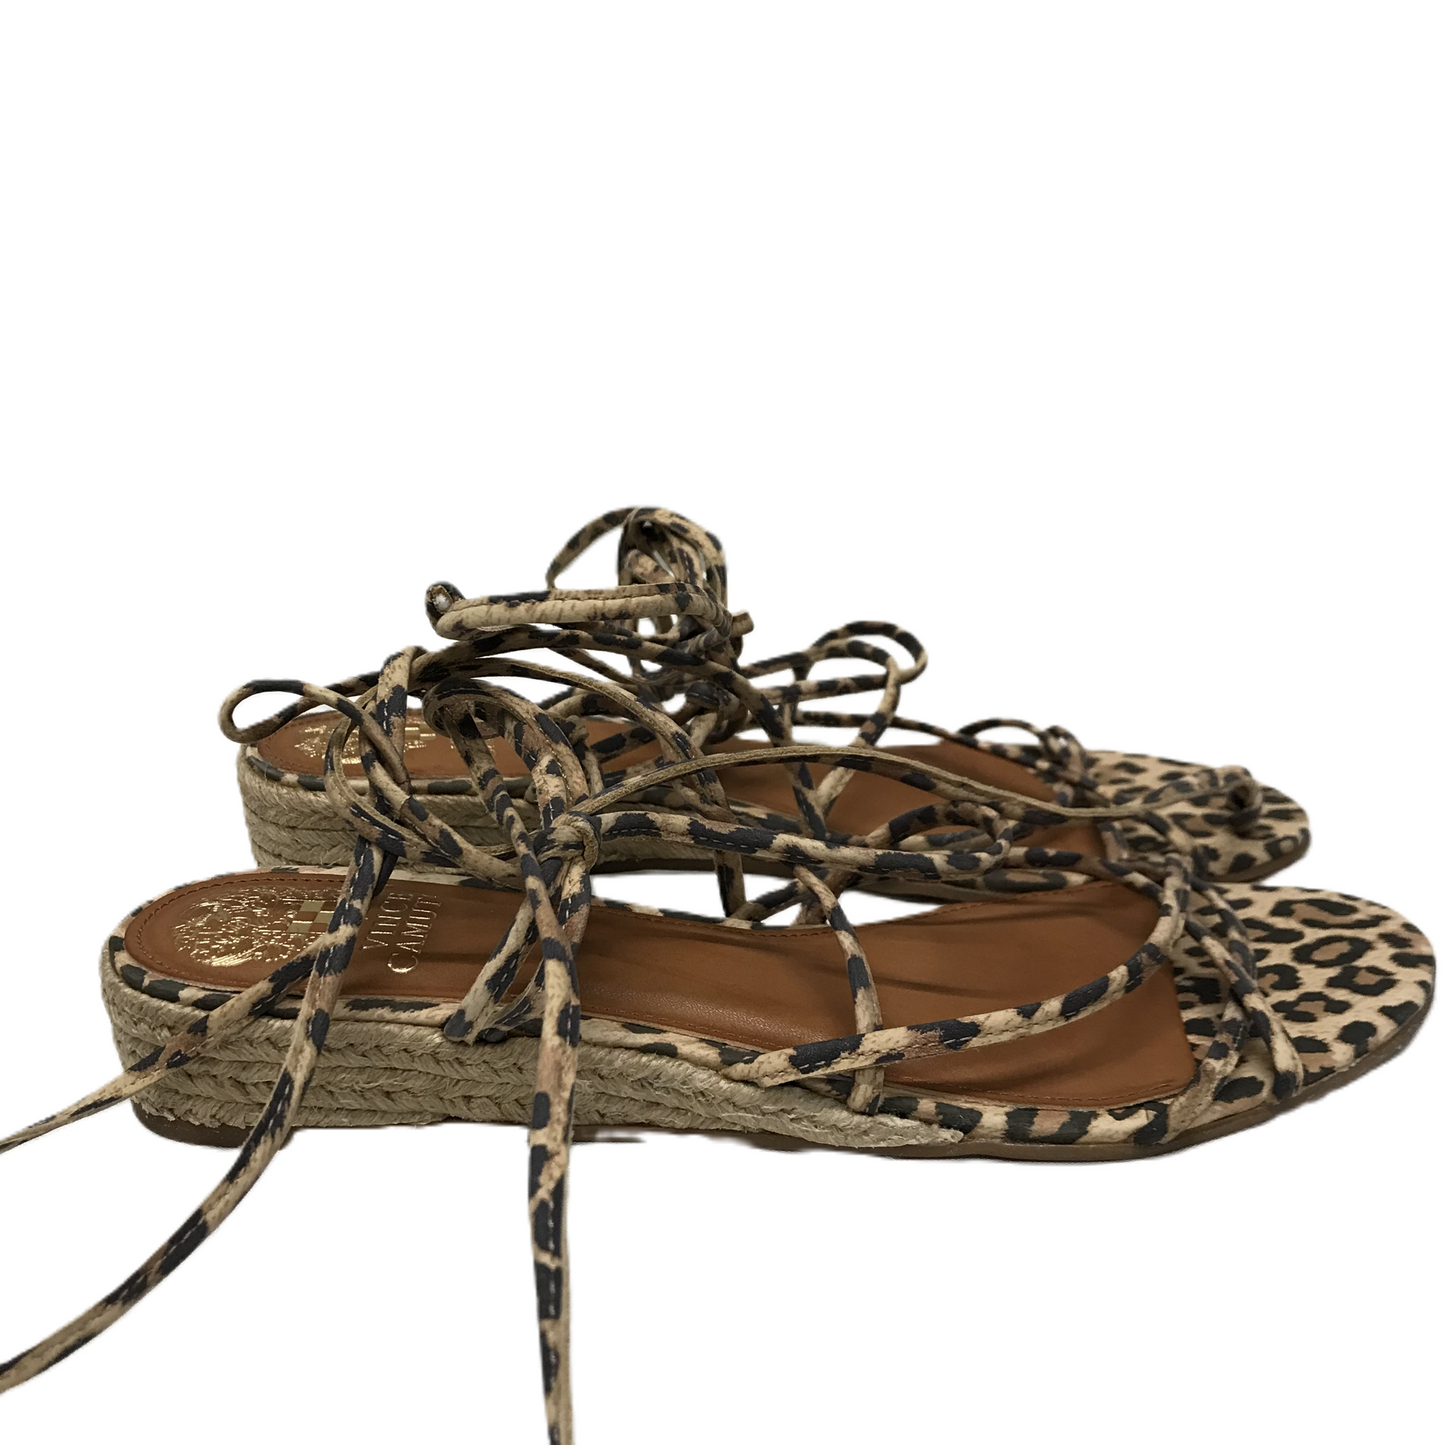 Animal Print Sandals Flats By Vince Camuto, Size: 9